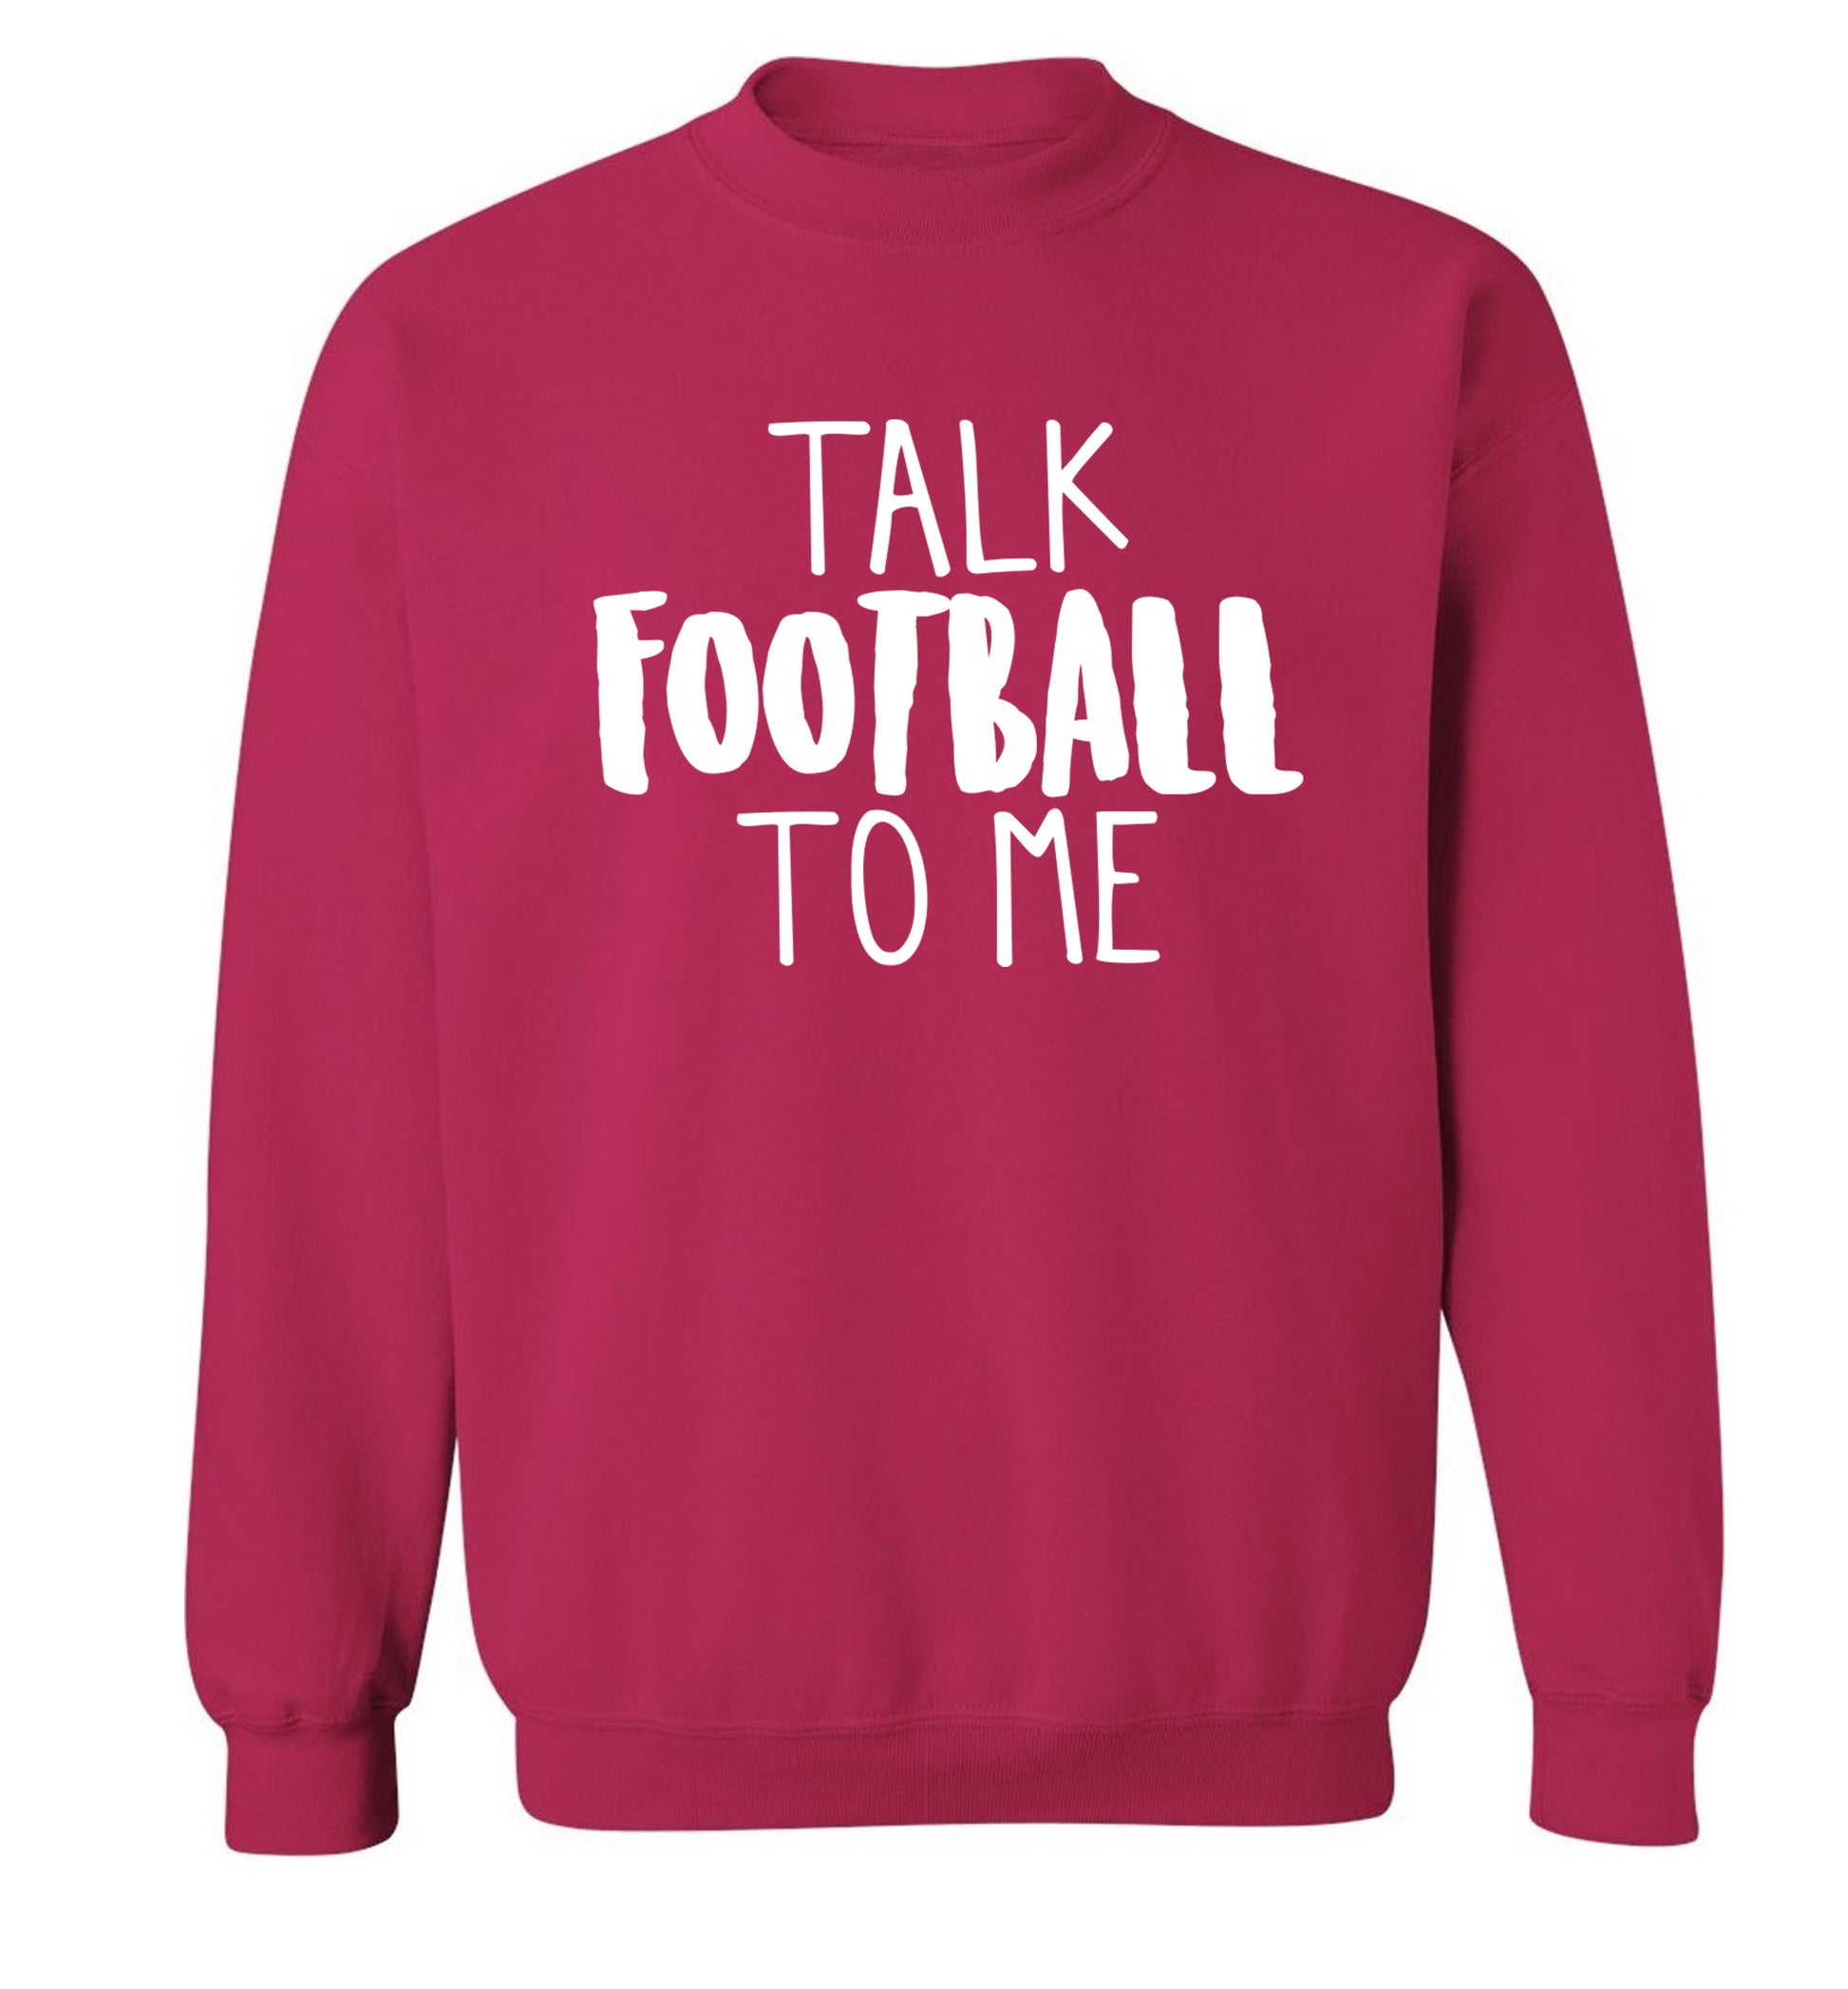 Talk football to me Adult's unisexpink Sweater 2XL